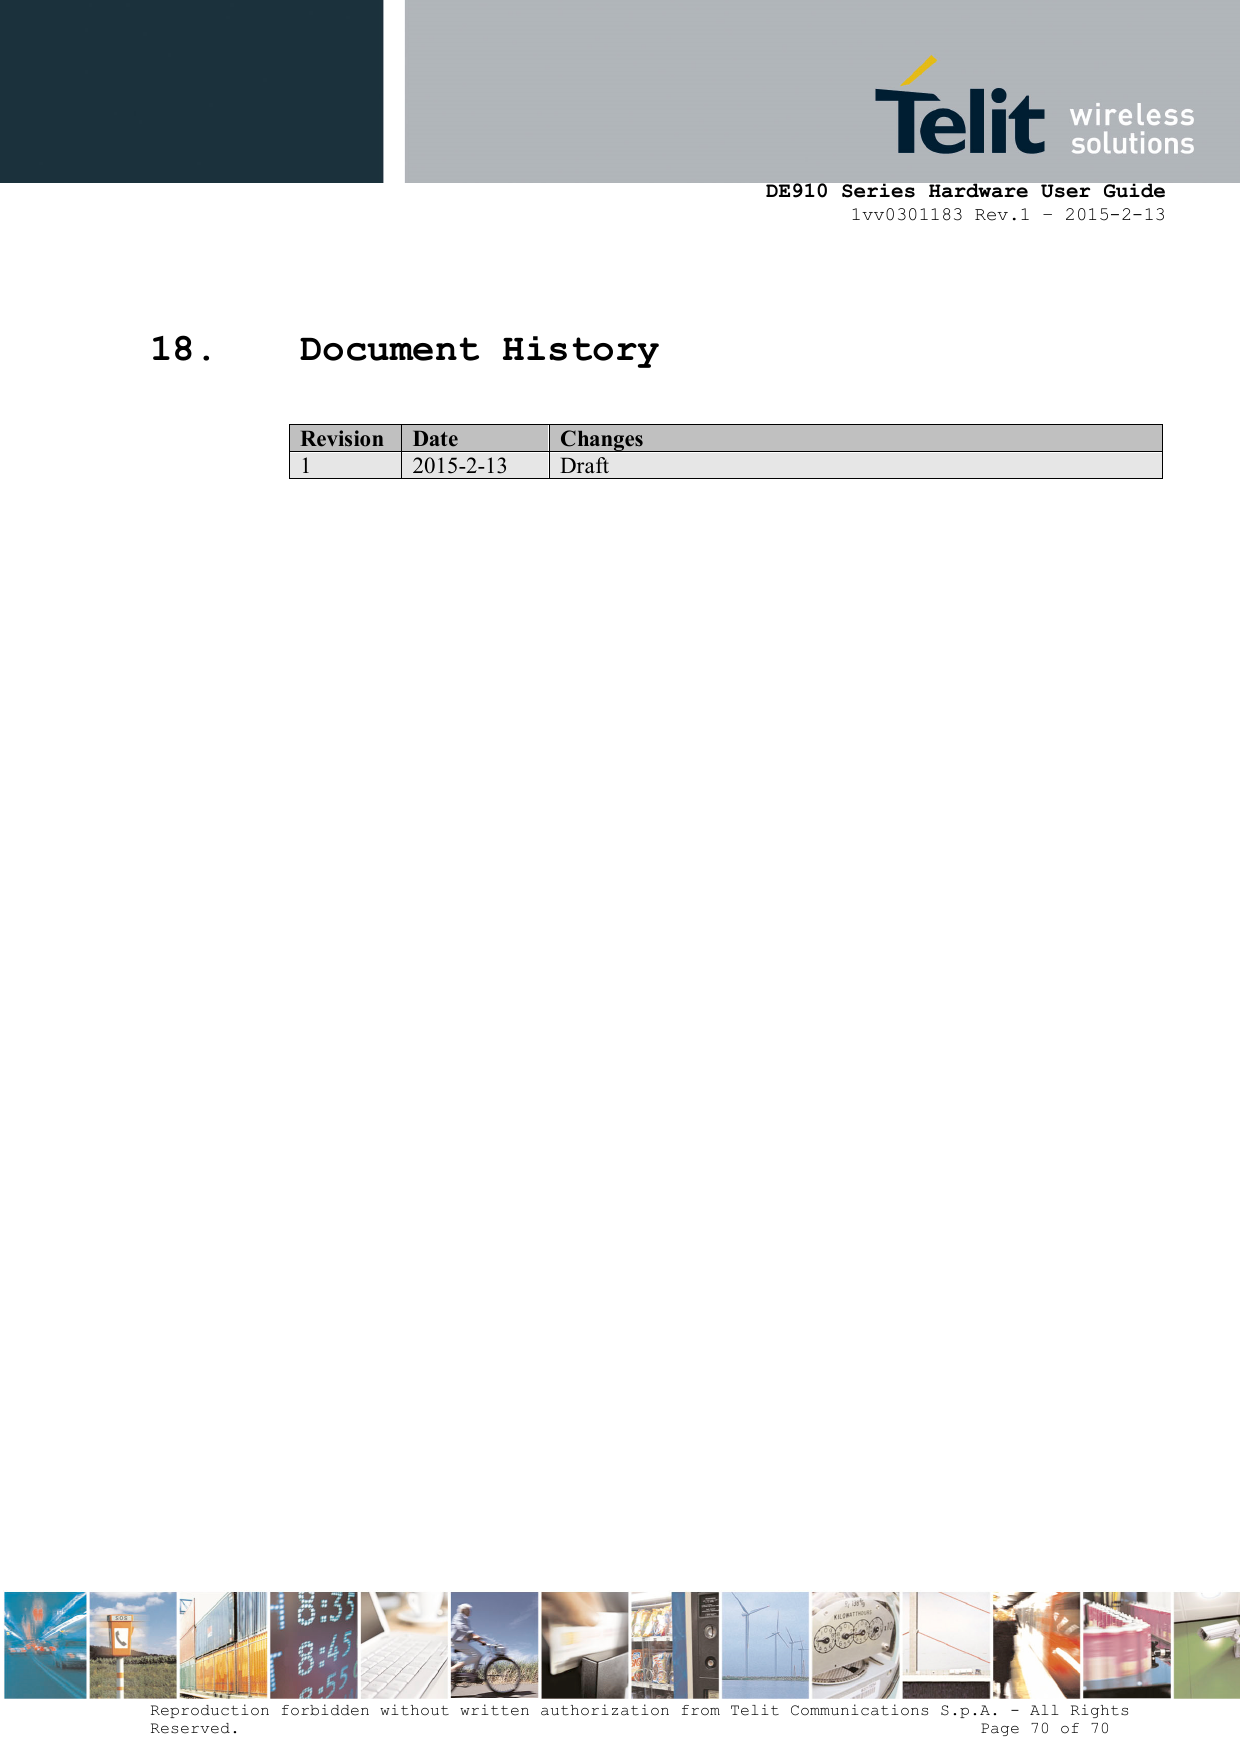      DE910 Series Hardware User Guide 1vv0301183 Rev.1 – 2015-2-13 Reproduction forbidden without written authorization from Telit Communications S.p.A. - All Rights Reserved.                                                                          Page 70 of 70 18. Document History  Revision Date Changes 1 2015-2-13 Draft     